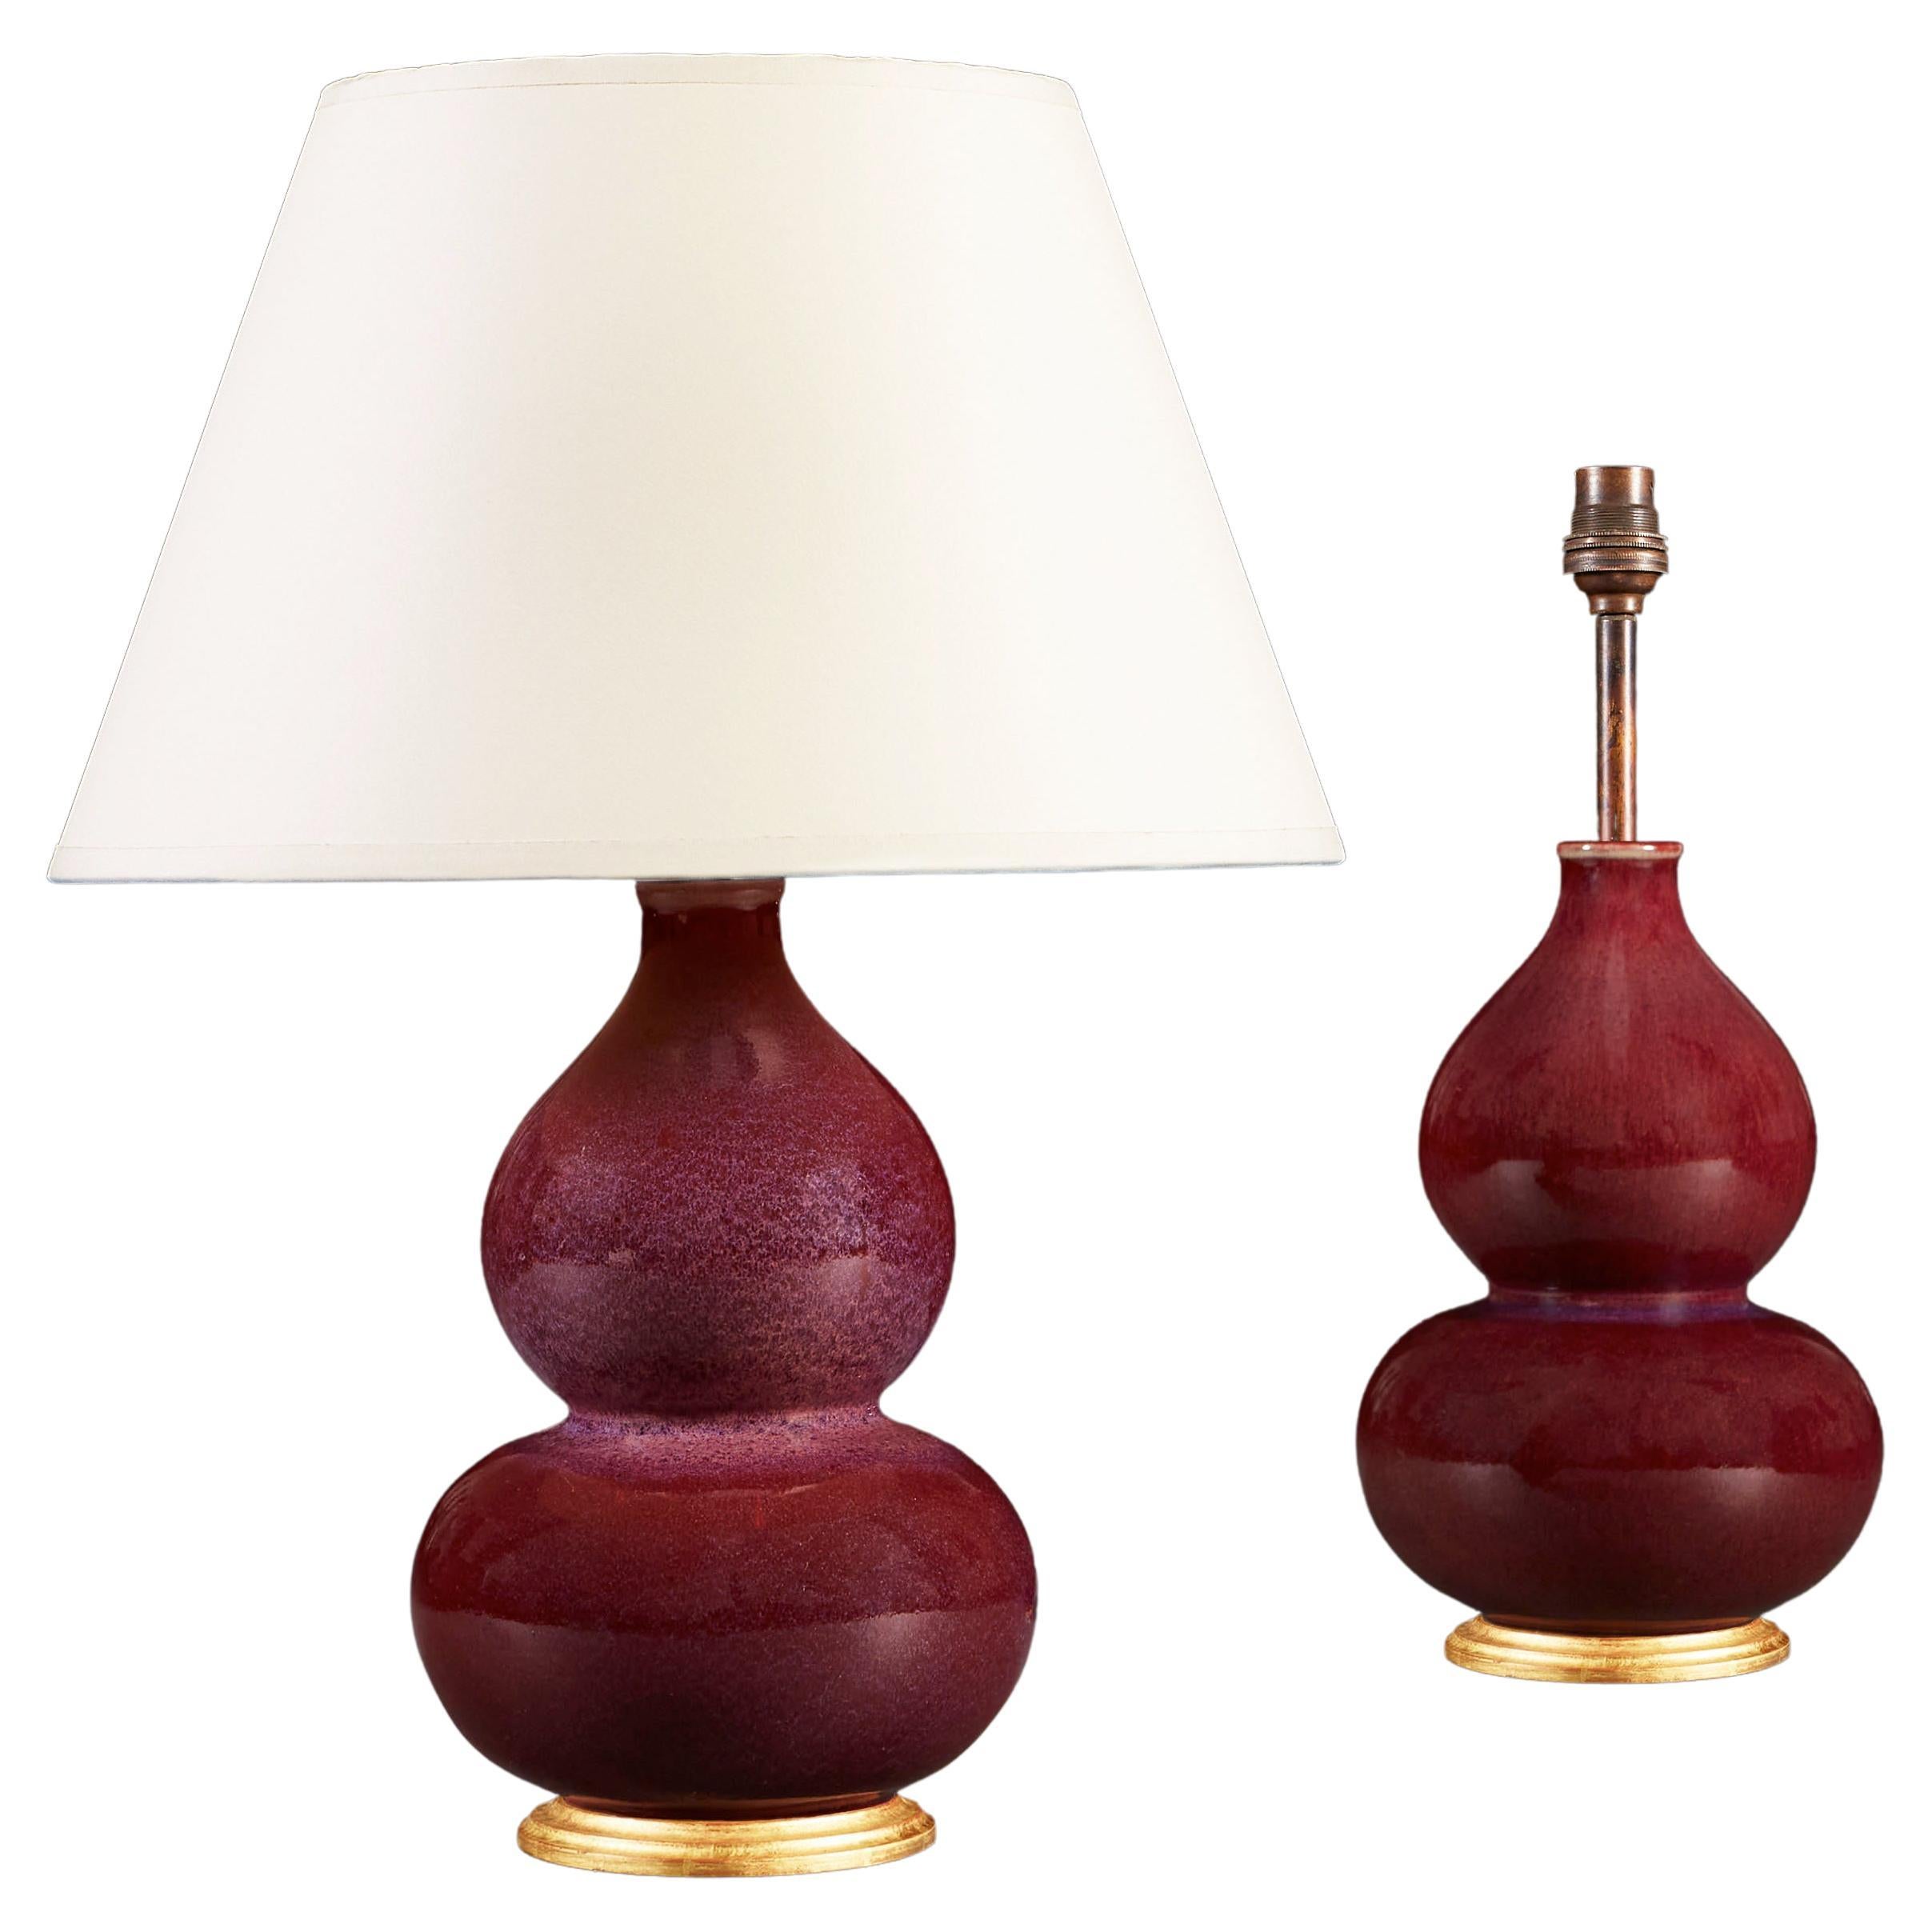 A Pair of Double Gourd Sang De Boeuf Vases as Table Lamps